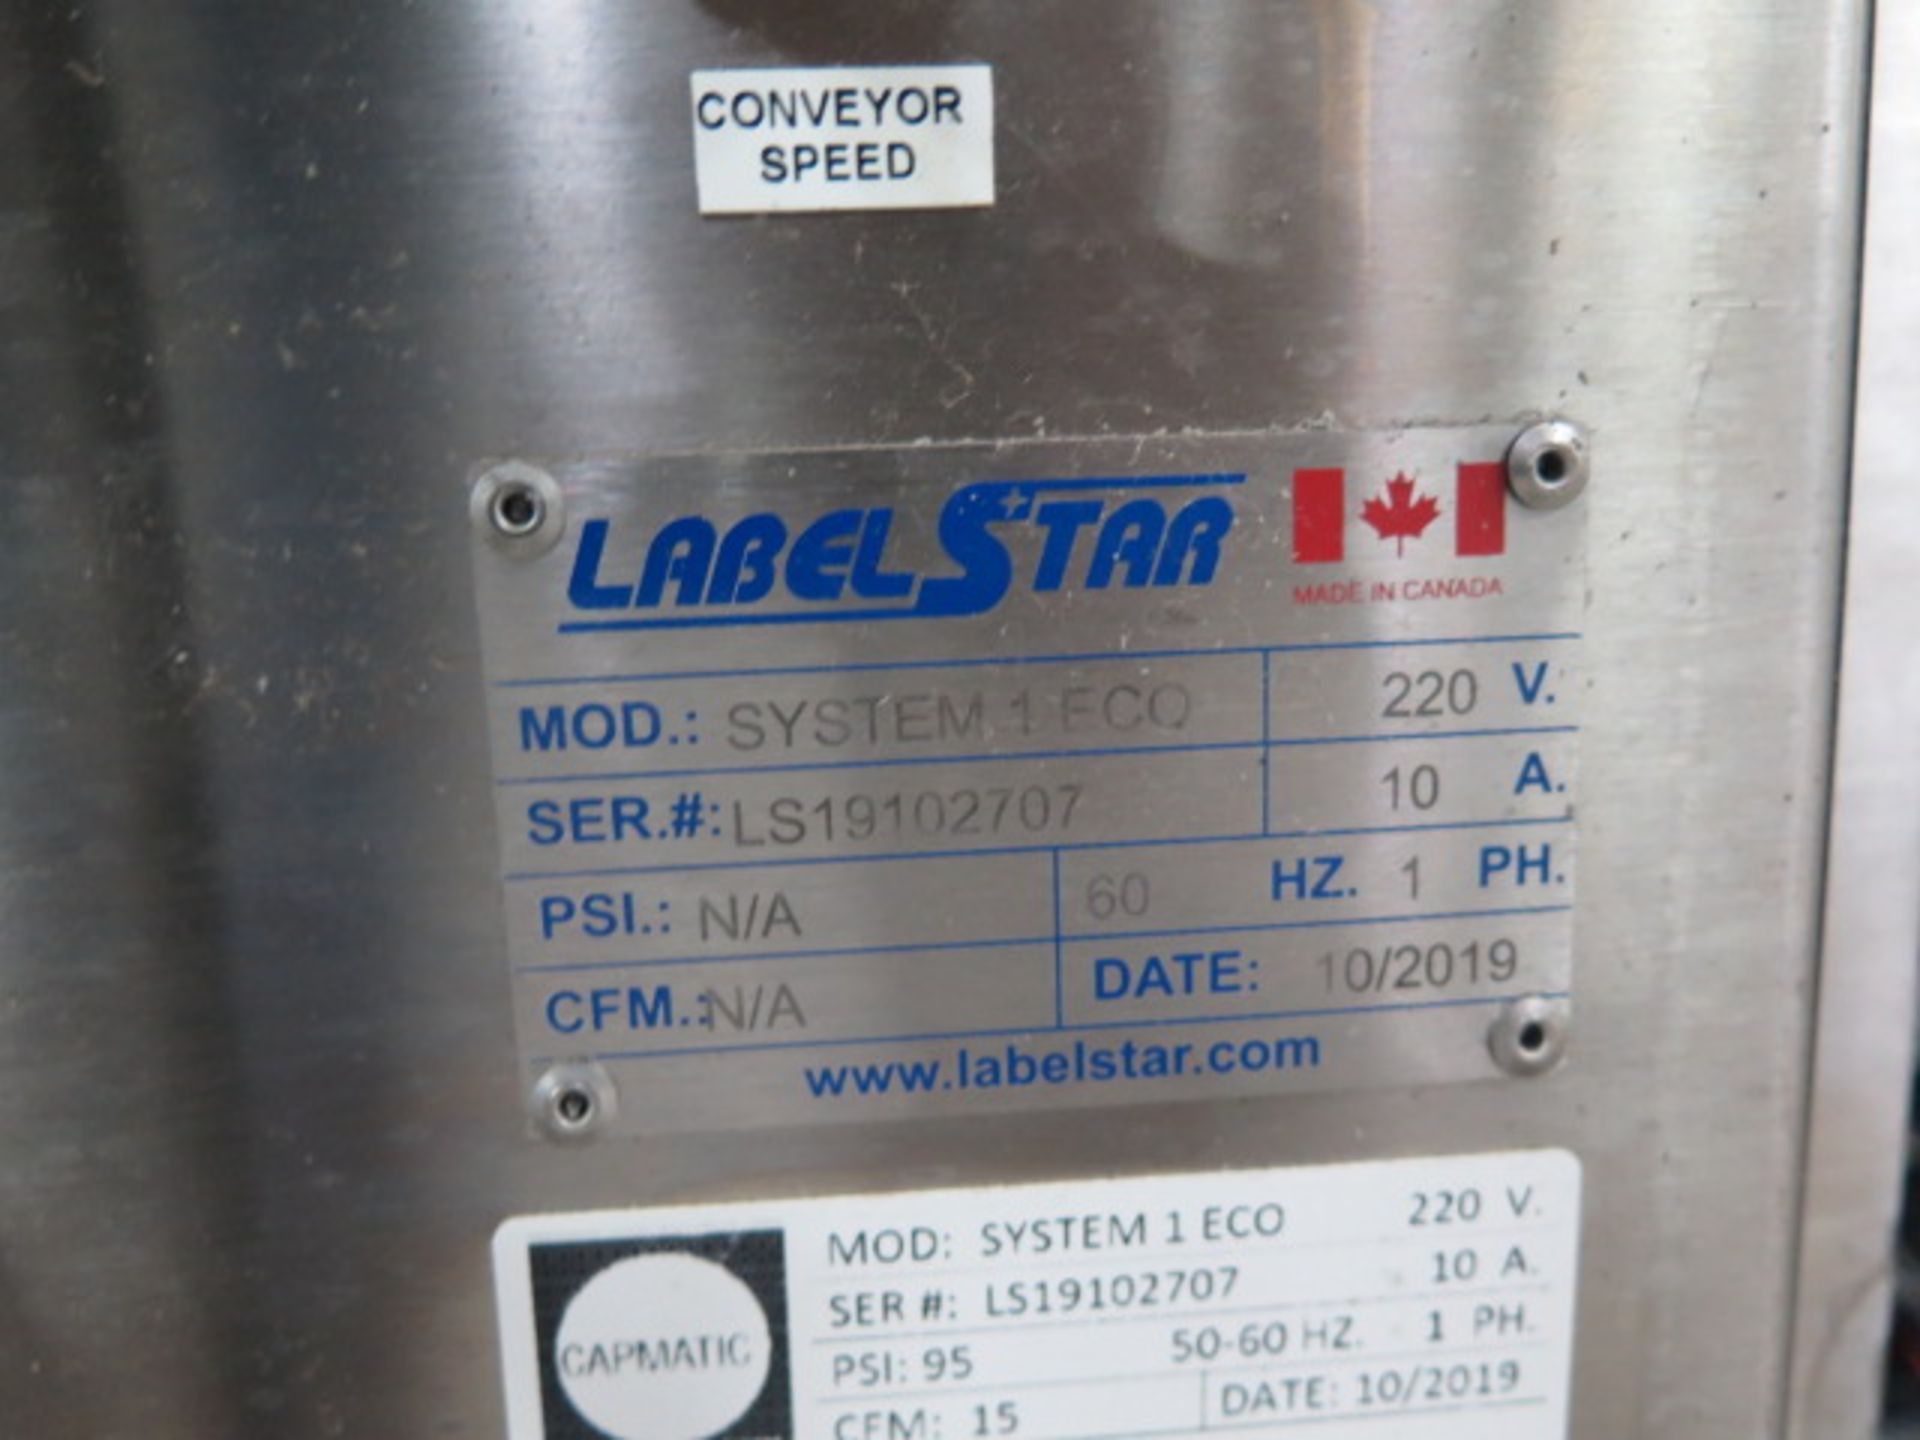 Capmatic "Label Star" System 1 ECO Automatic Labeler w/ Conveyor (SOLD AS-IS - NO WARRANTY) - Image 12 of 12